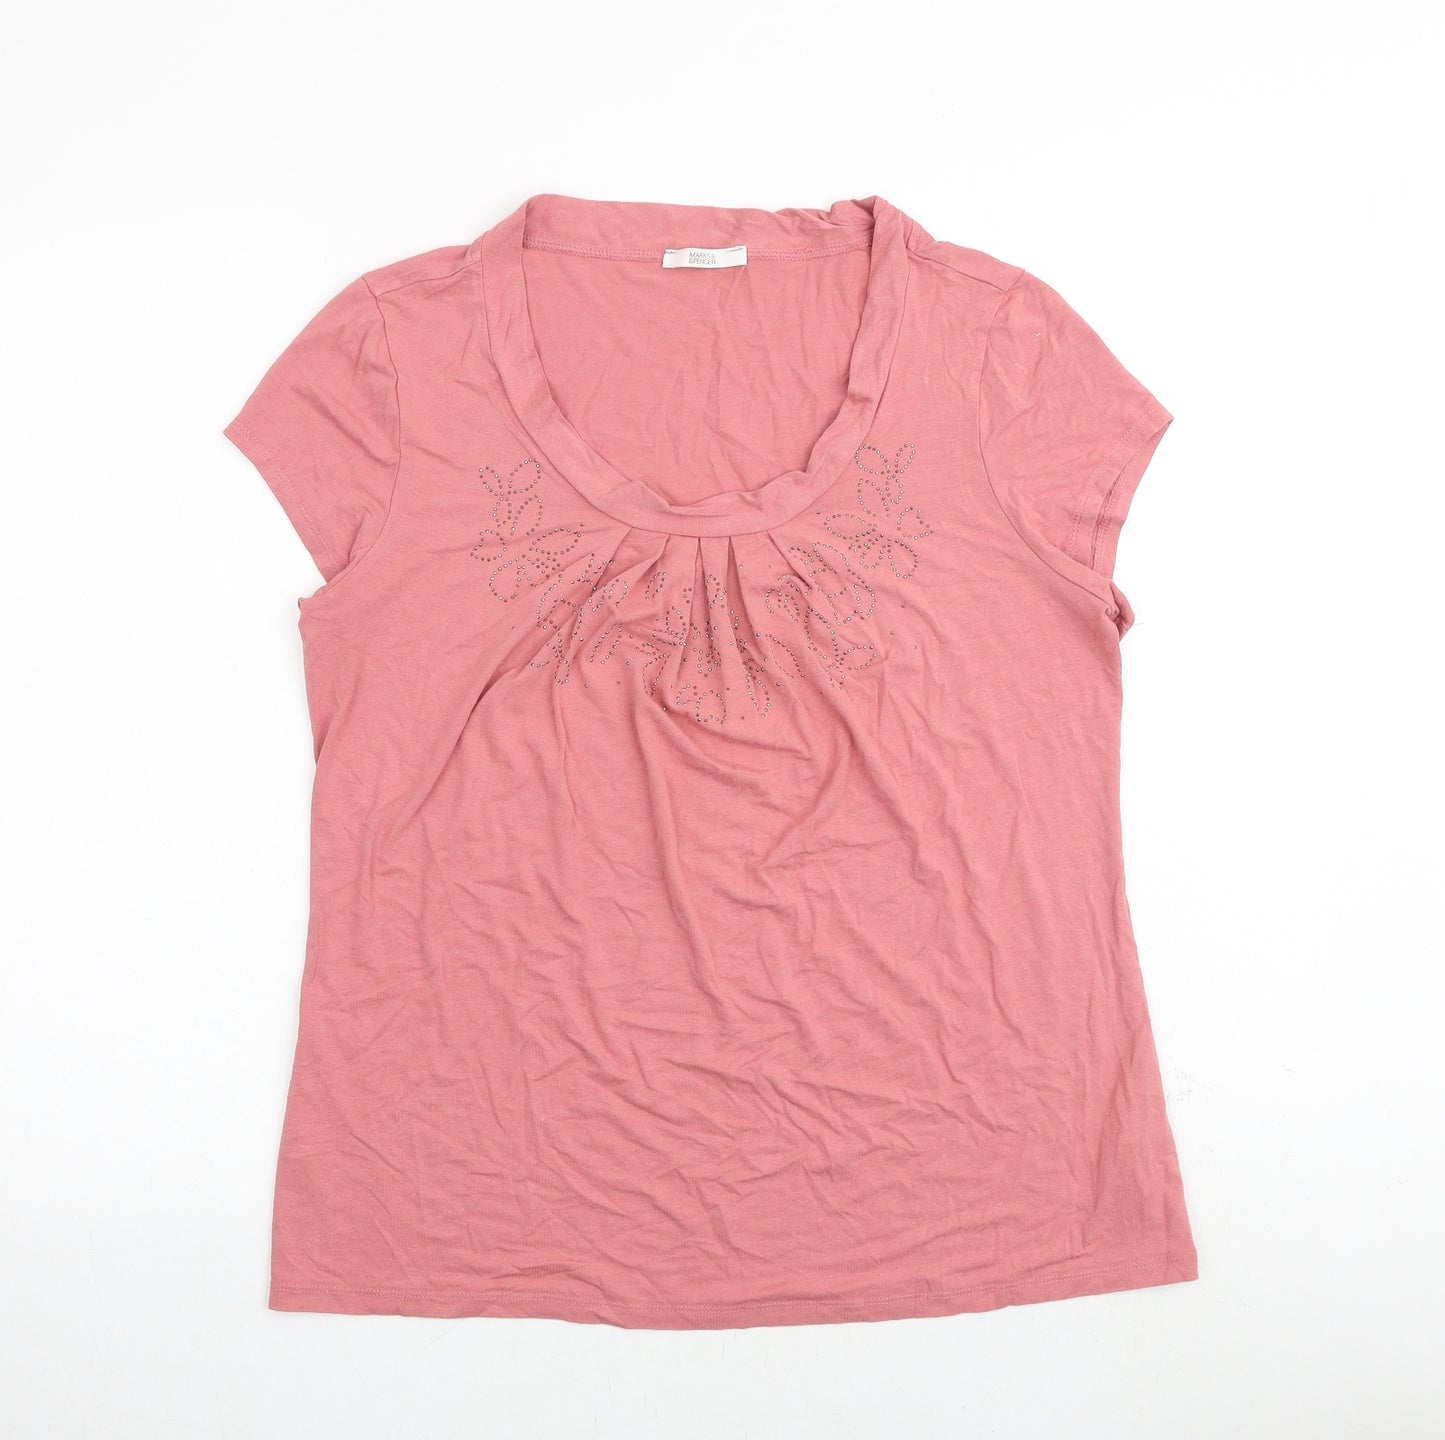 Marks and Spencer Womens Pink Viscose Basic T-Shirt Size 14 Scoop Neck